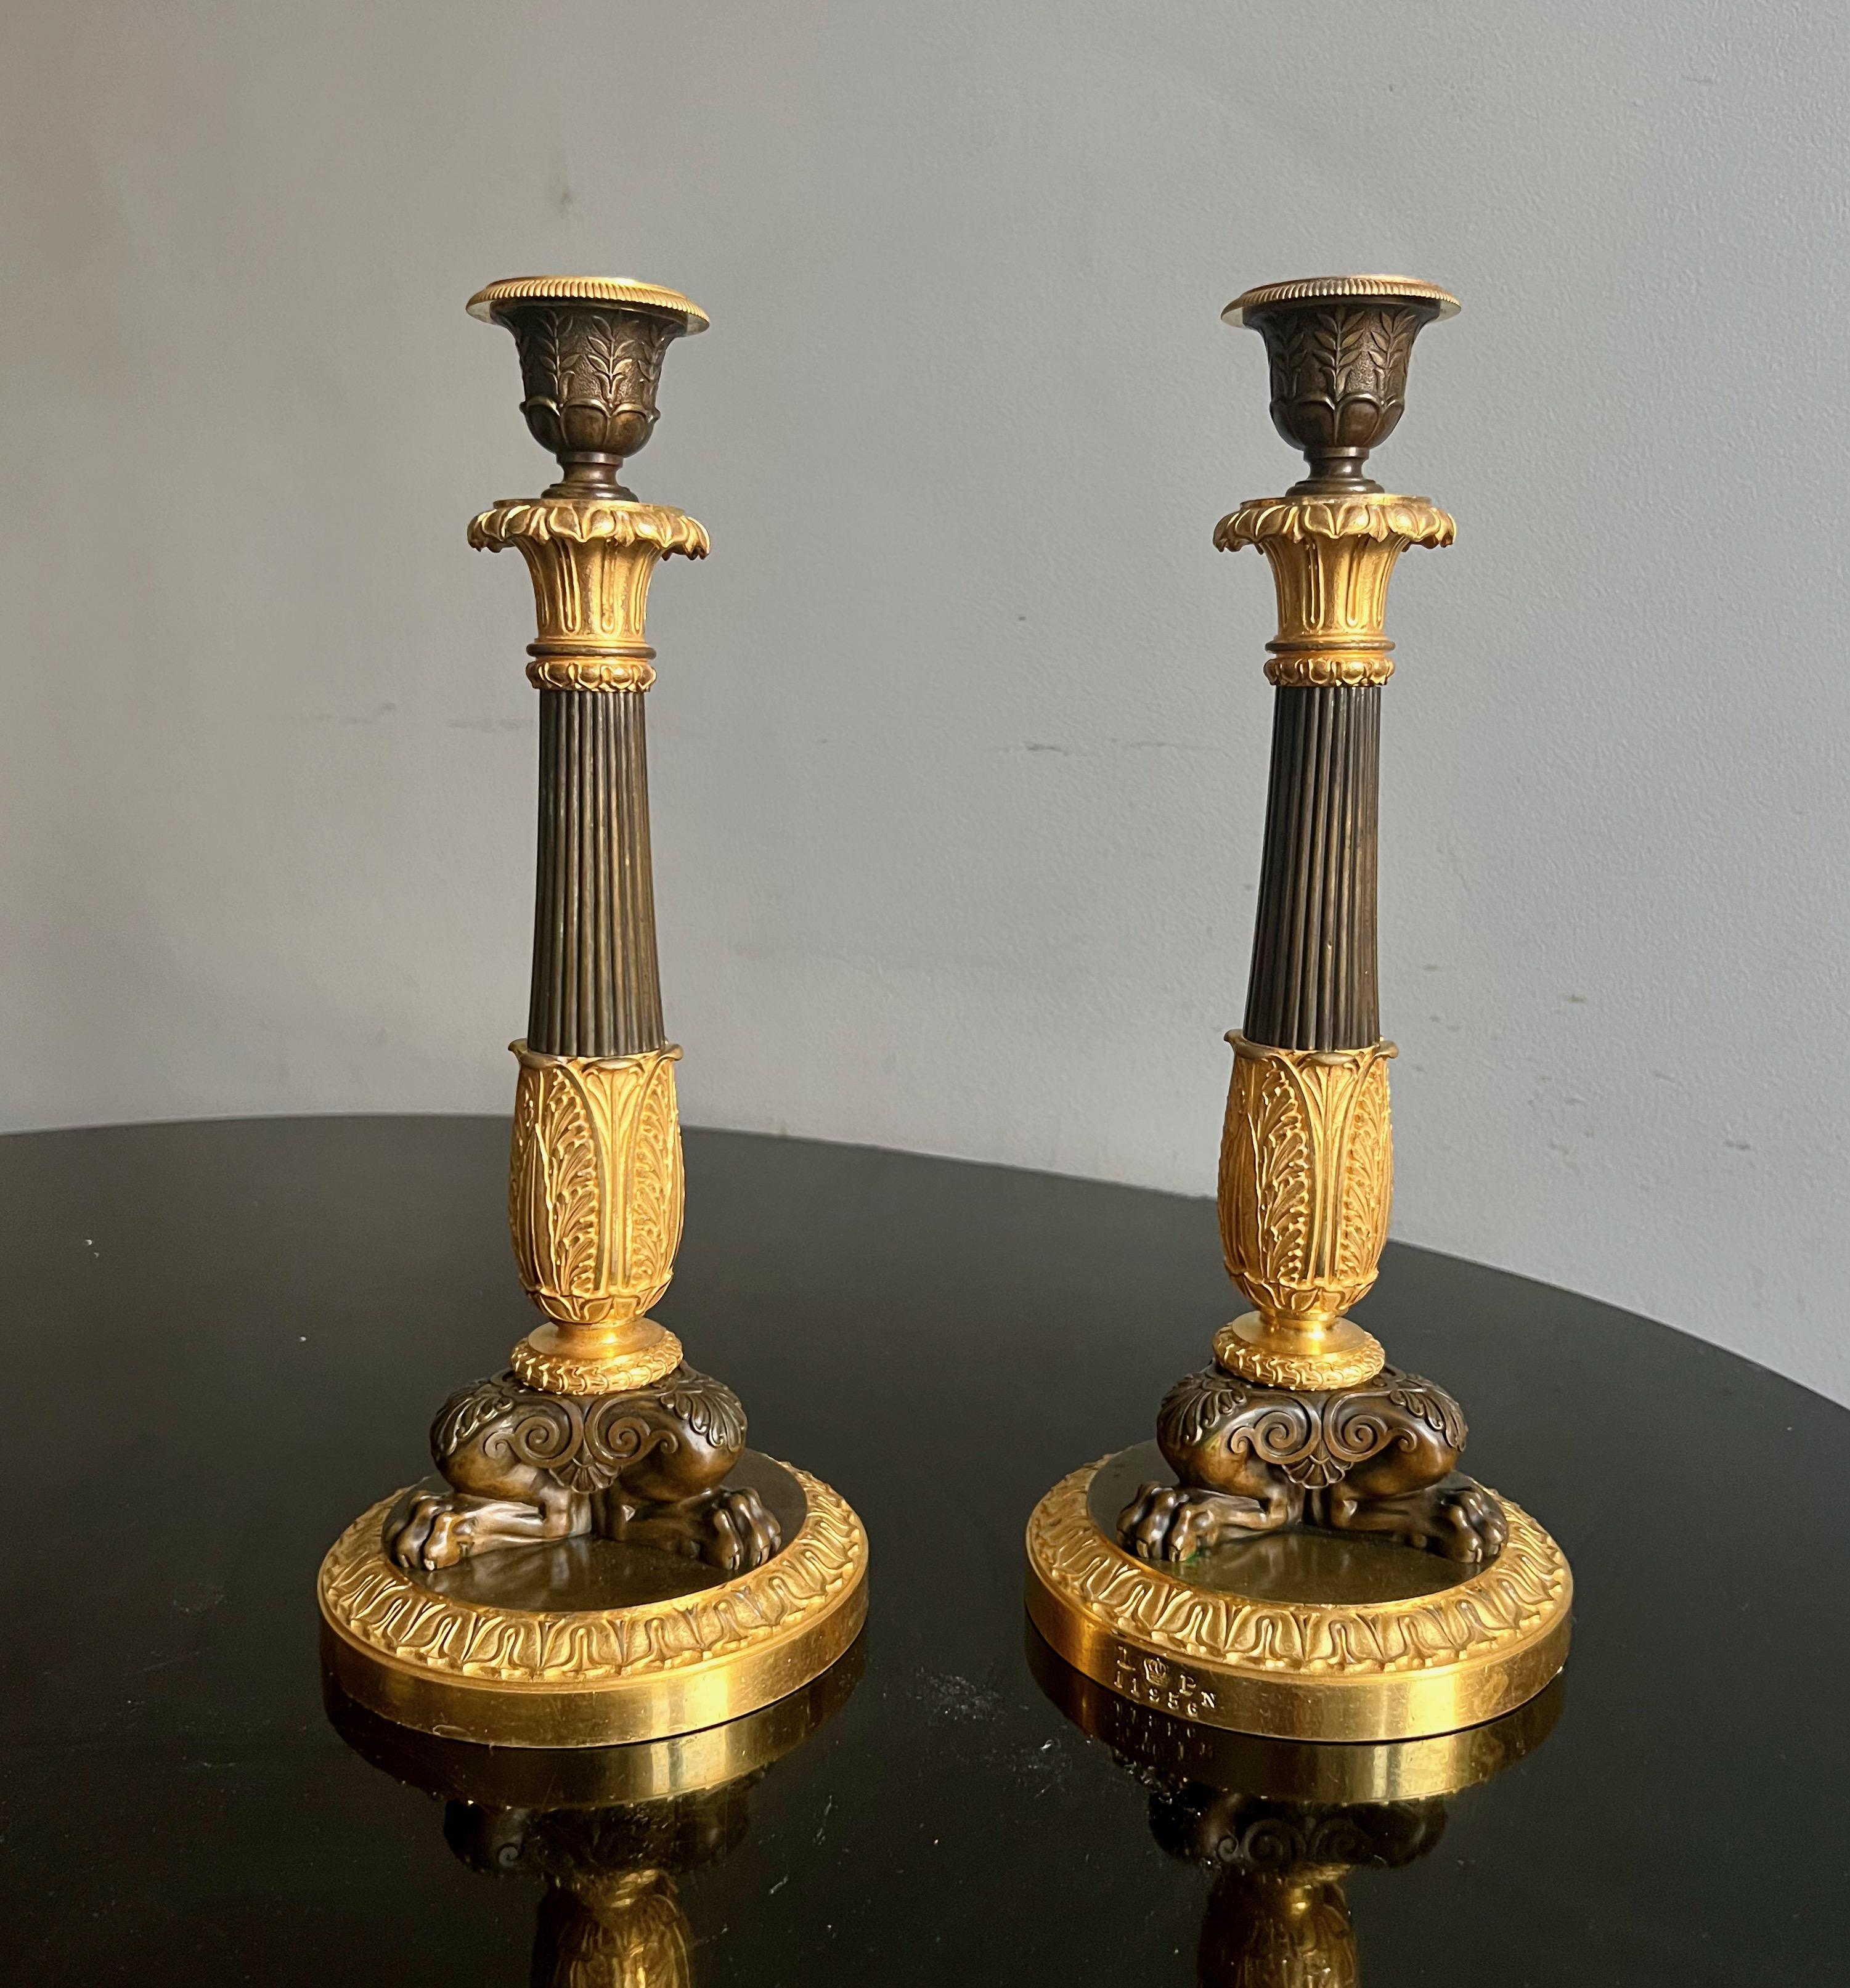 Mid-19th Century Pair of Royal Candlesticks from King Louis-Philippe's Chateau De Neuilly